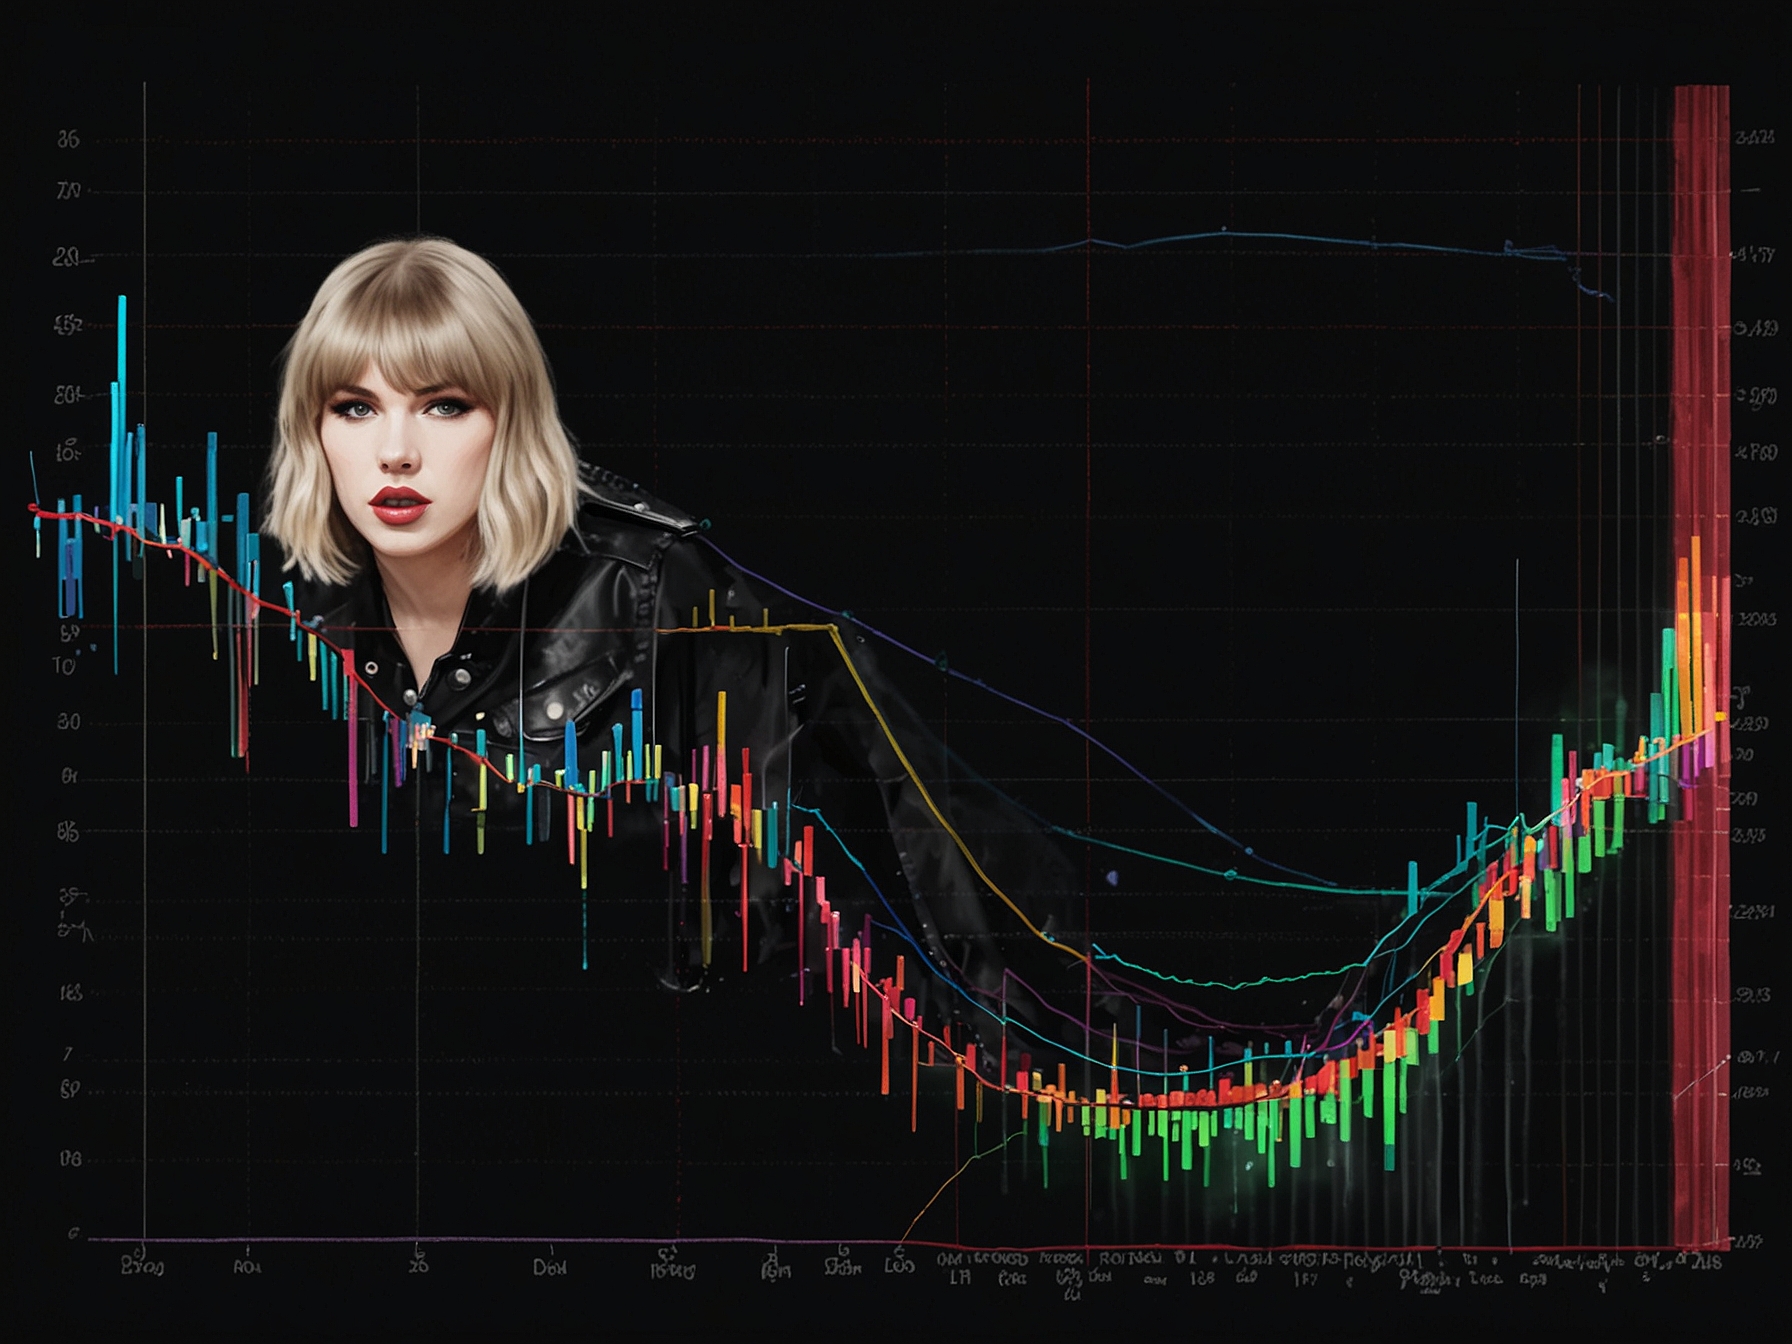 Graph showing Taylor Swift's songs topping multiple chart positions, with Charli XCX and Billie Eilish's songs trailing below, highlighting the 'chart blocking' phenomenon.